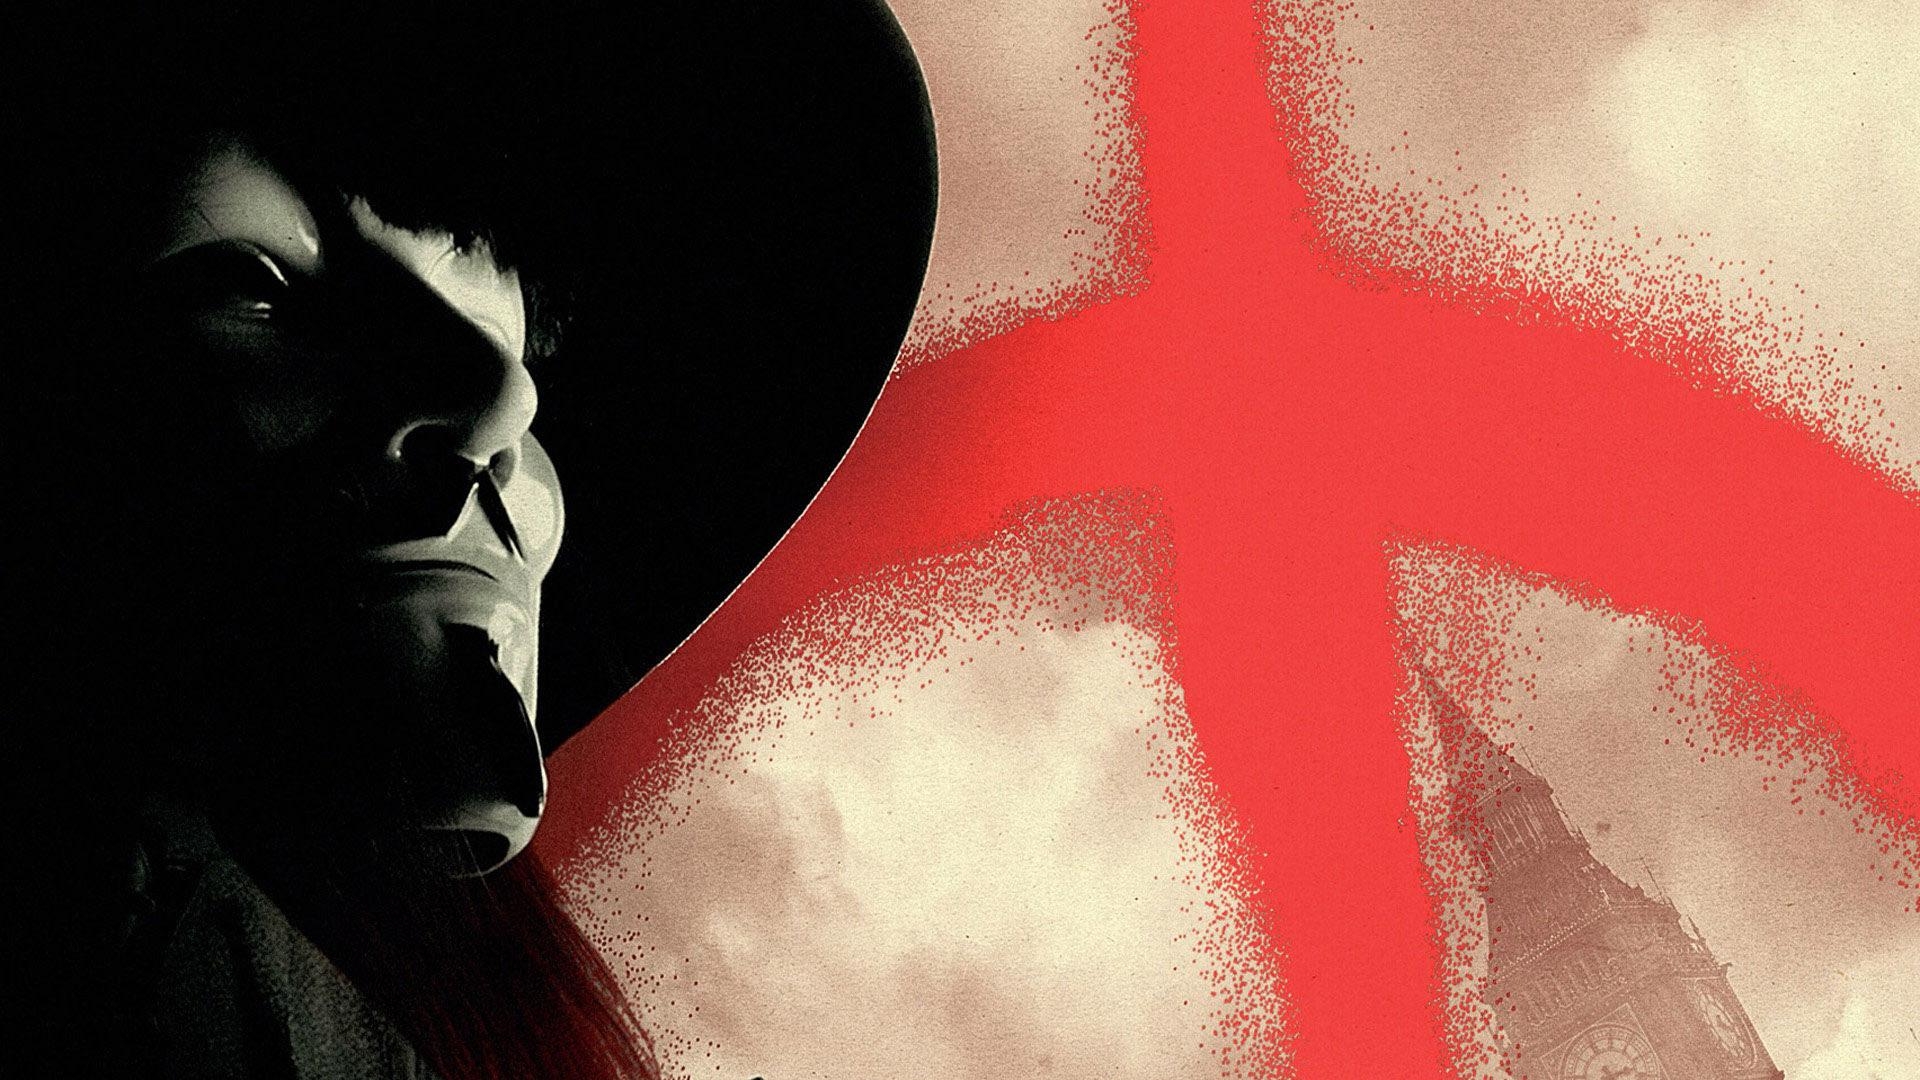 V for Vendetta Blu-ray Steelbook will get a New Edition in the UK